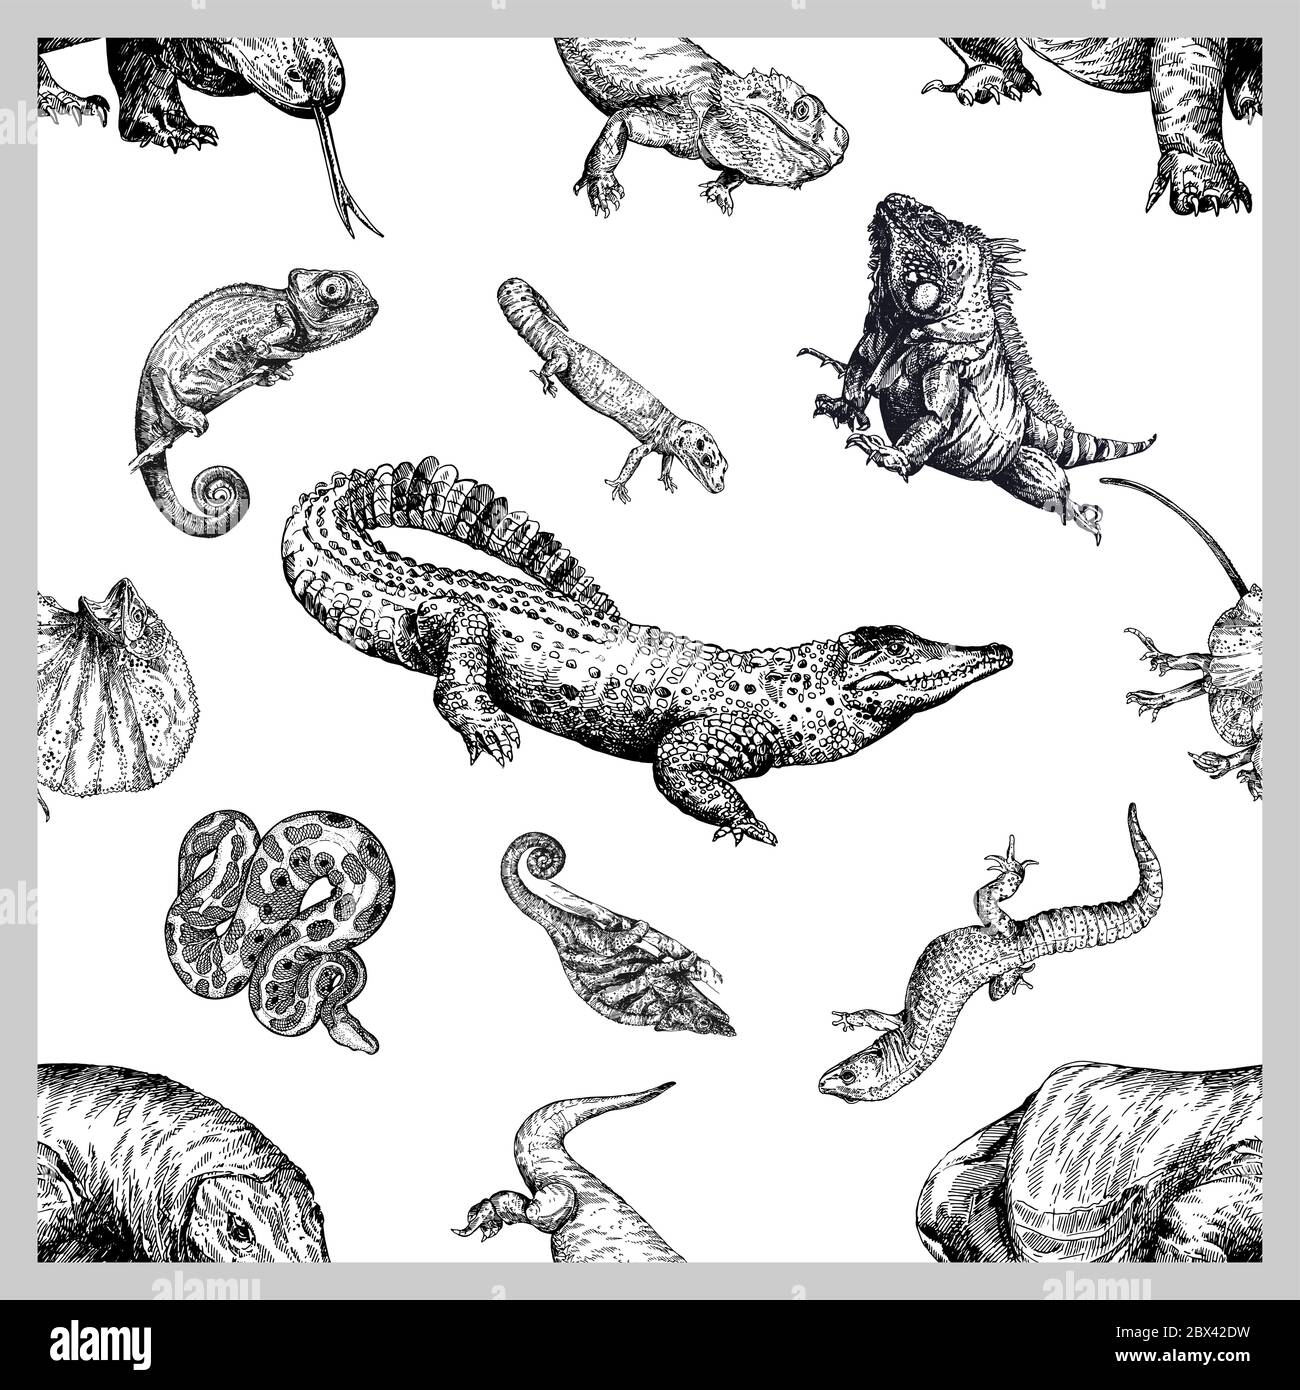 Seamless pattern of hand drawn sketch style reptiles isolated on white background. Vector illustration. Stock Vector